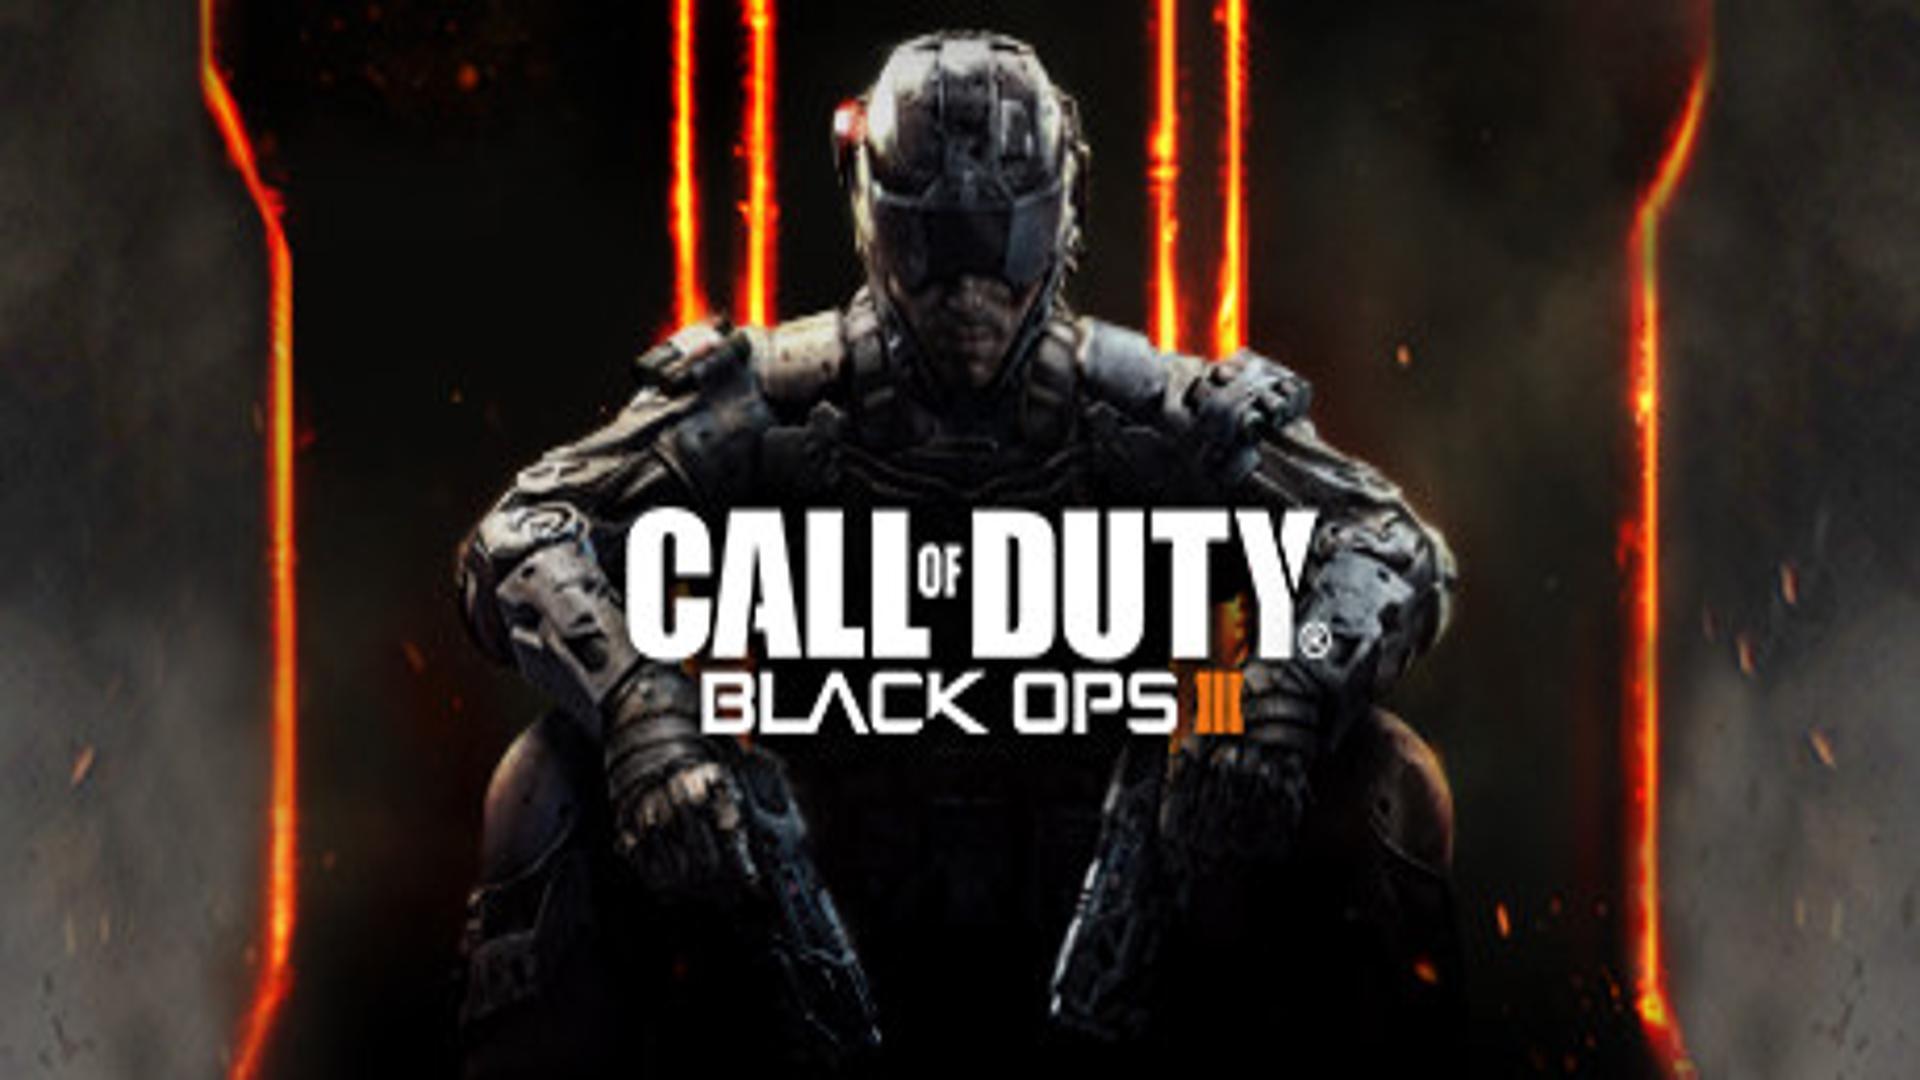 Call of Duty: Black Ops III Complete (V.100.0.0.0.0)